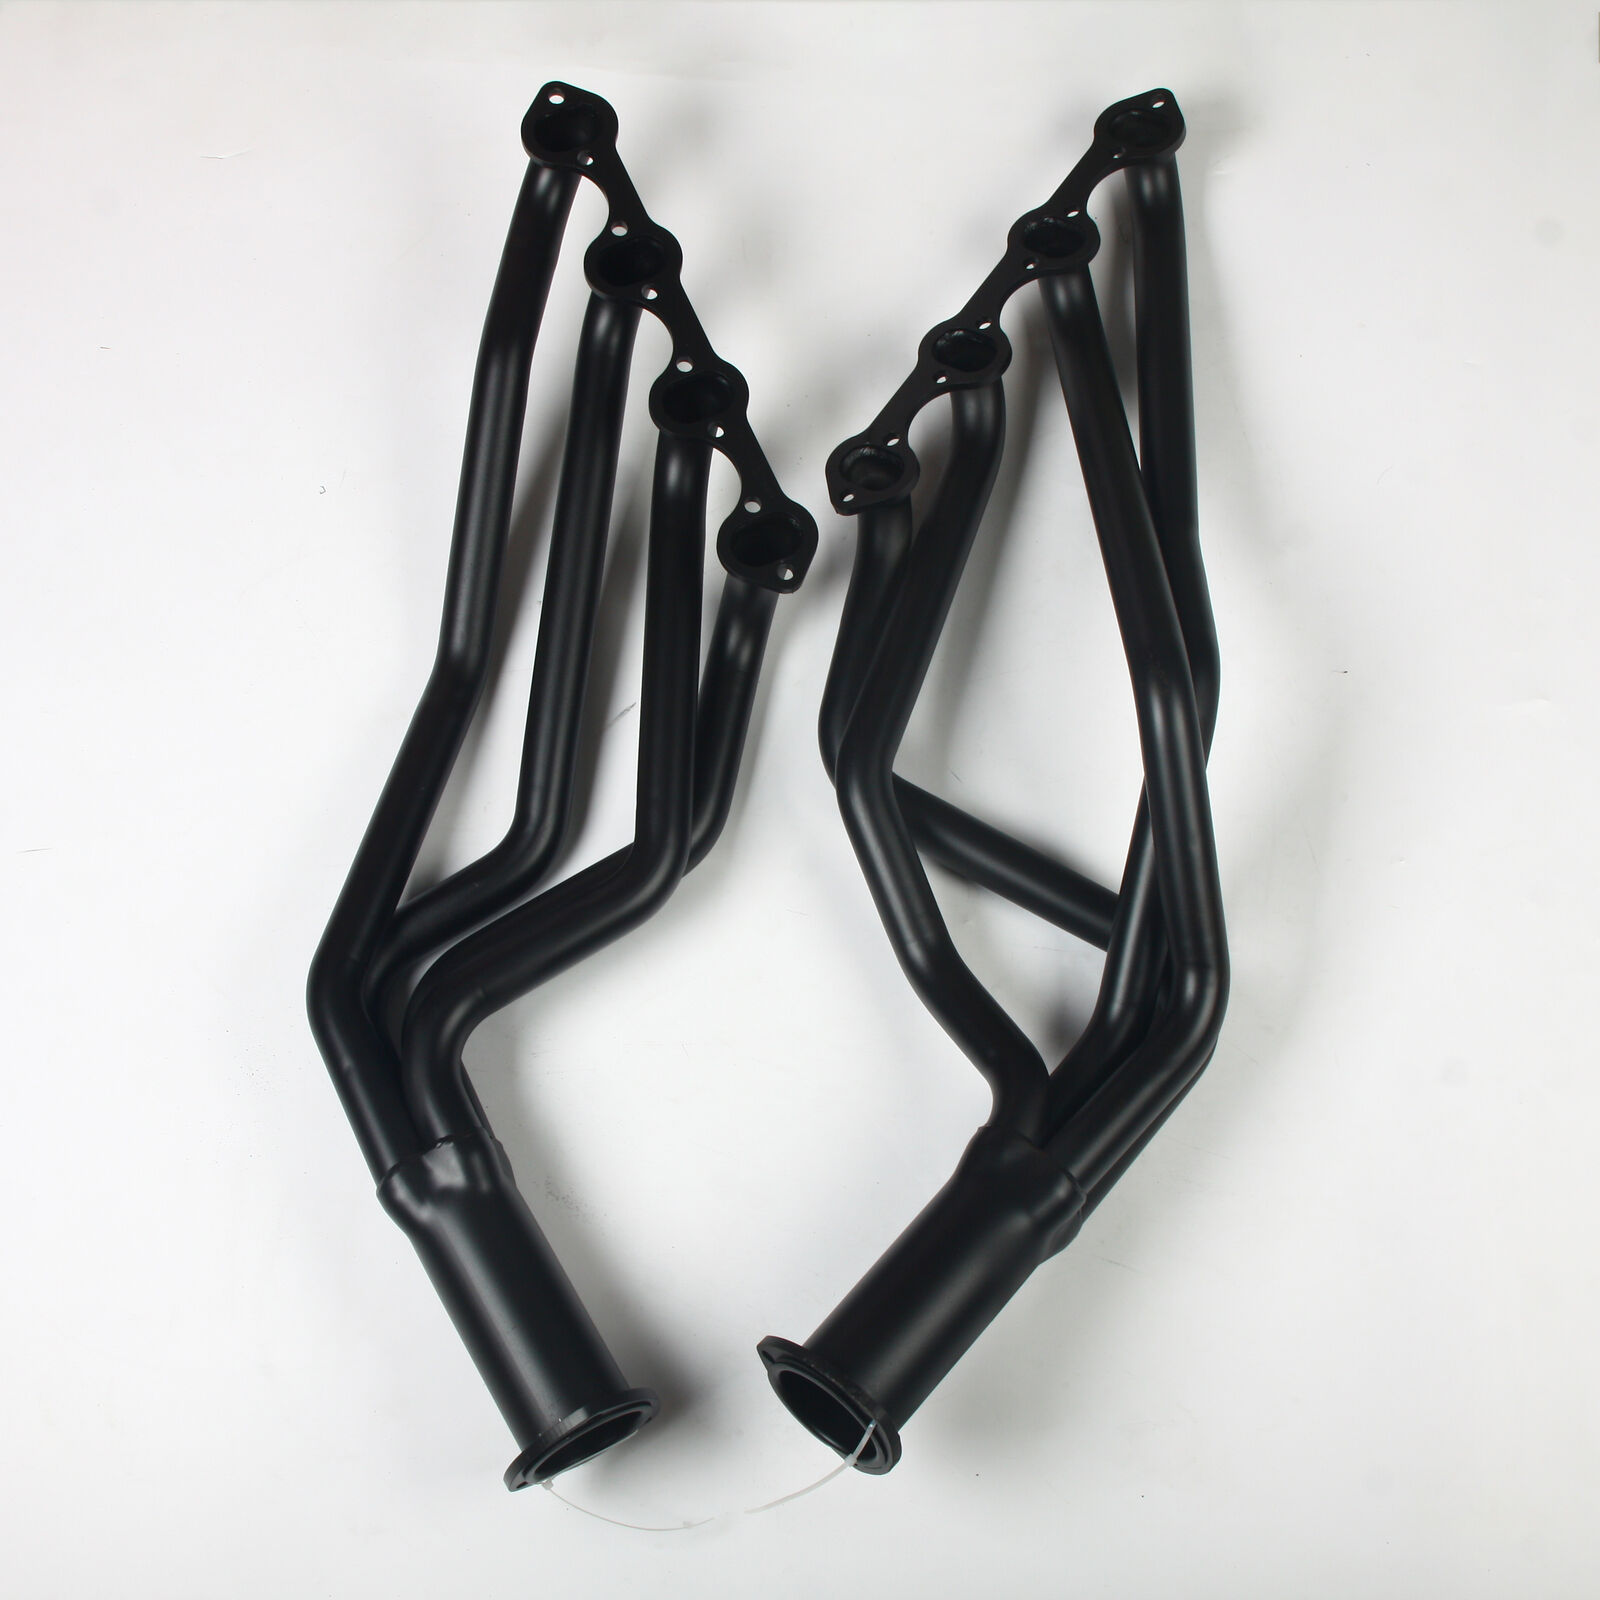 Long Tube Headers For 1968-1973 Torino/Cyclone/Montego Comet 260-302W